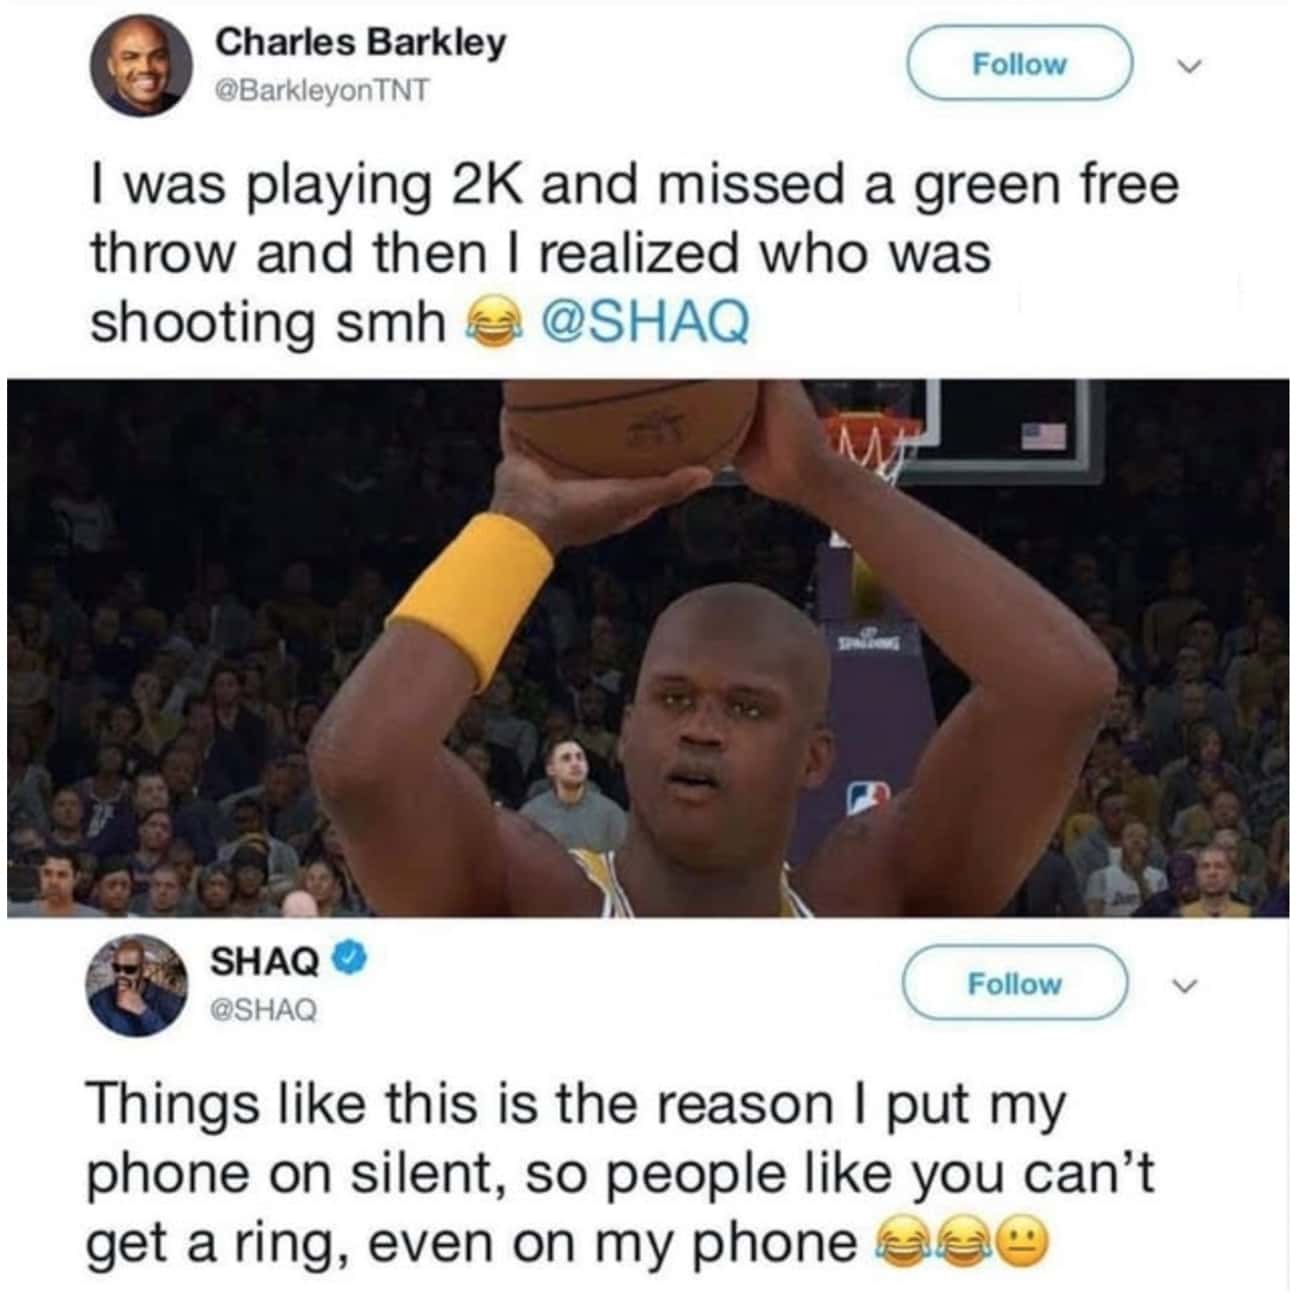 celebs savage replies - photo caption - Charles Barkley I was playing 2K and missed a green free throw and then I realized who was shooting smh Shaq for Things this is the reason I put my phone on silent, so people you can't get a ring, even on my phone 2